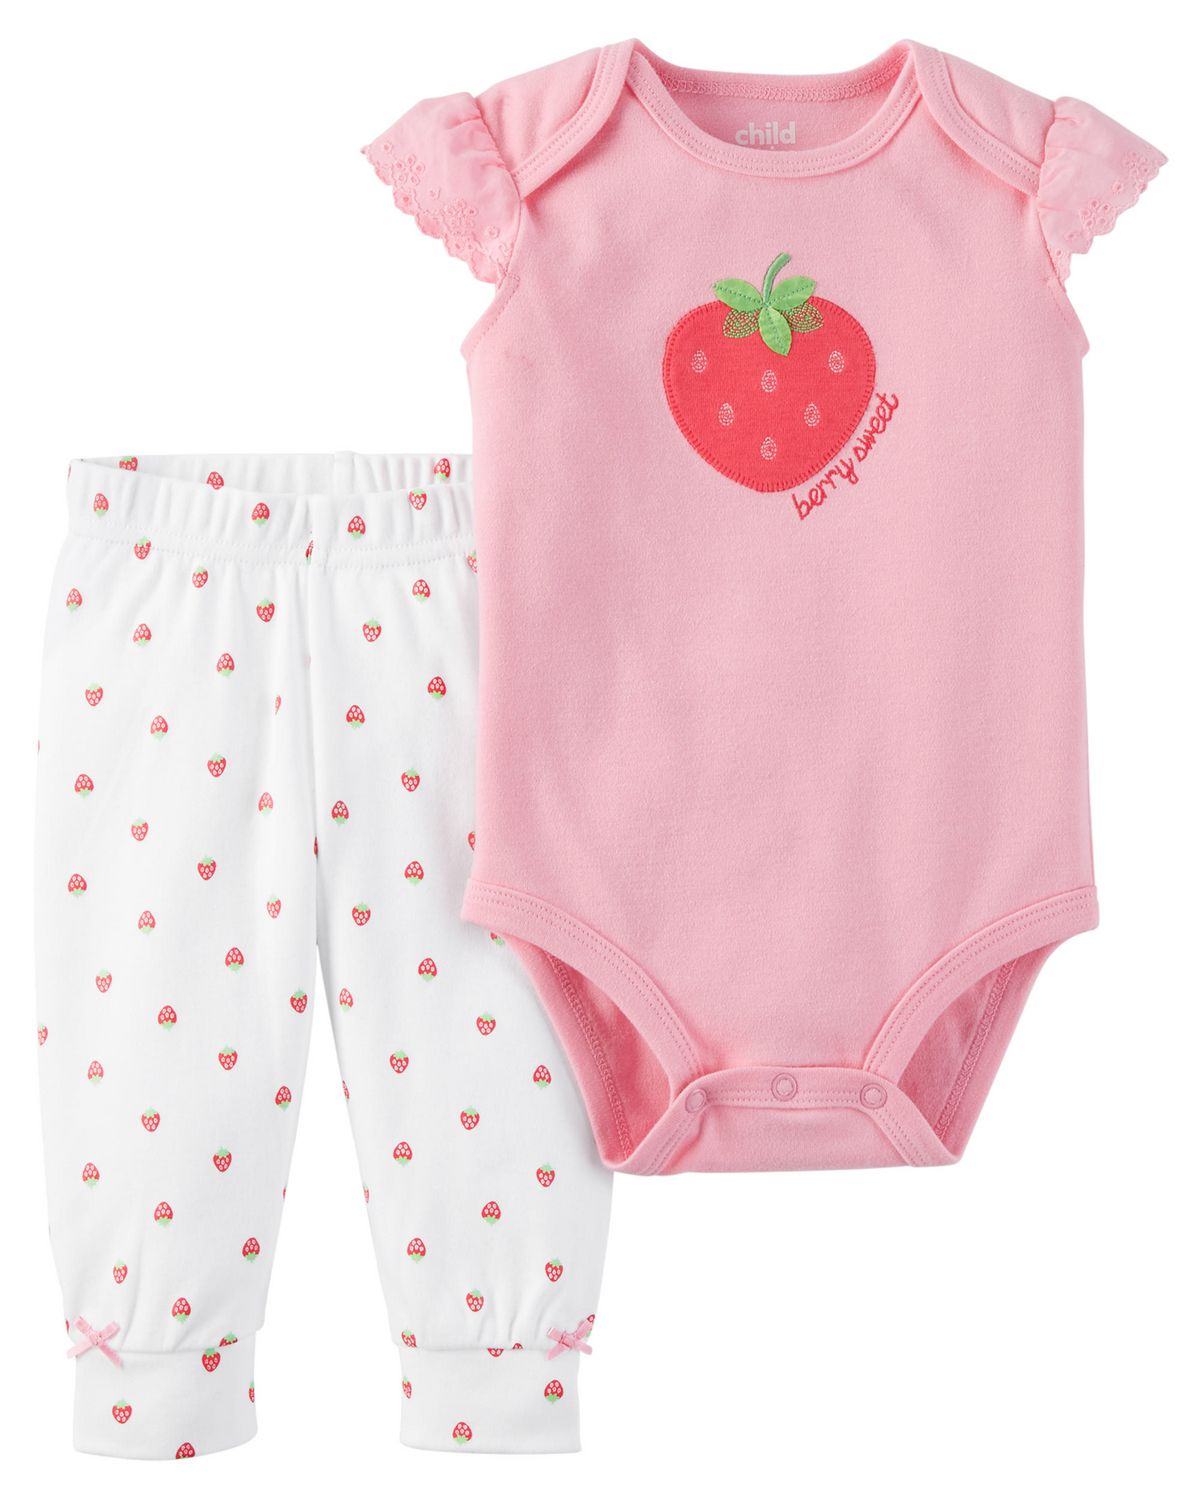 Child of Mine made by Carter's Baby Girls' Strawberry Printed Outfit ...